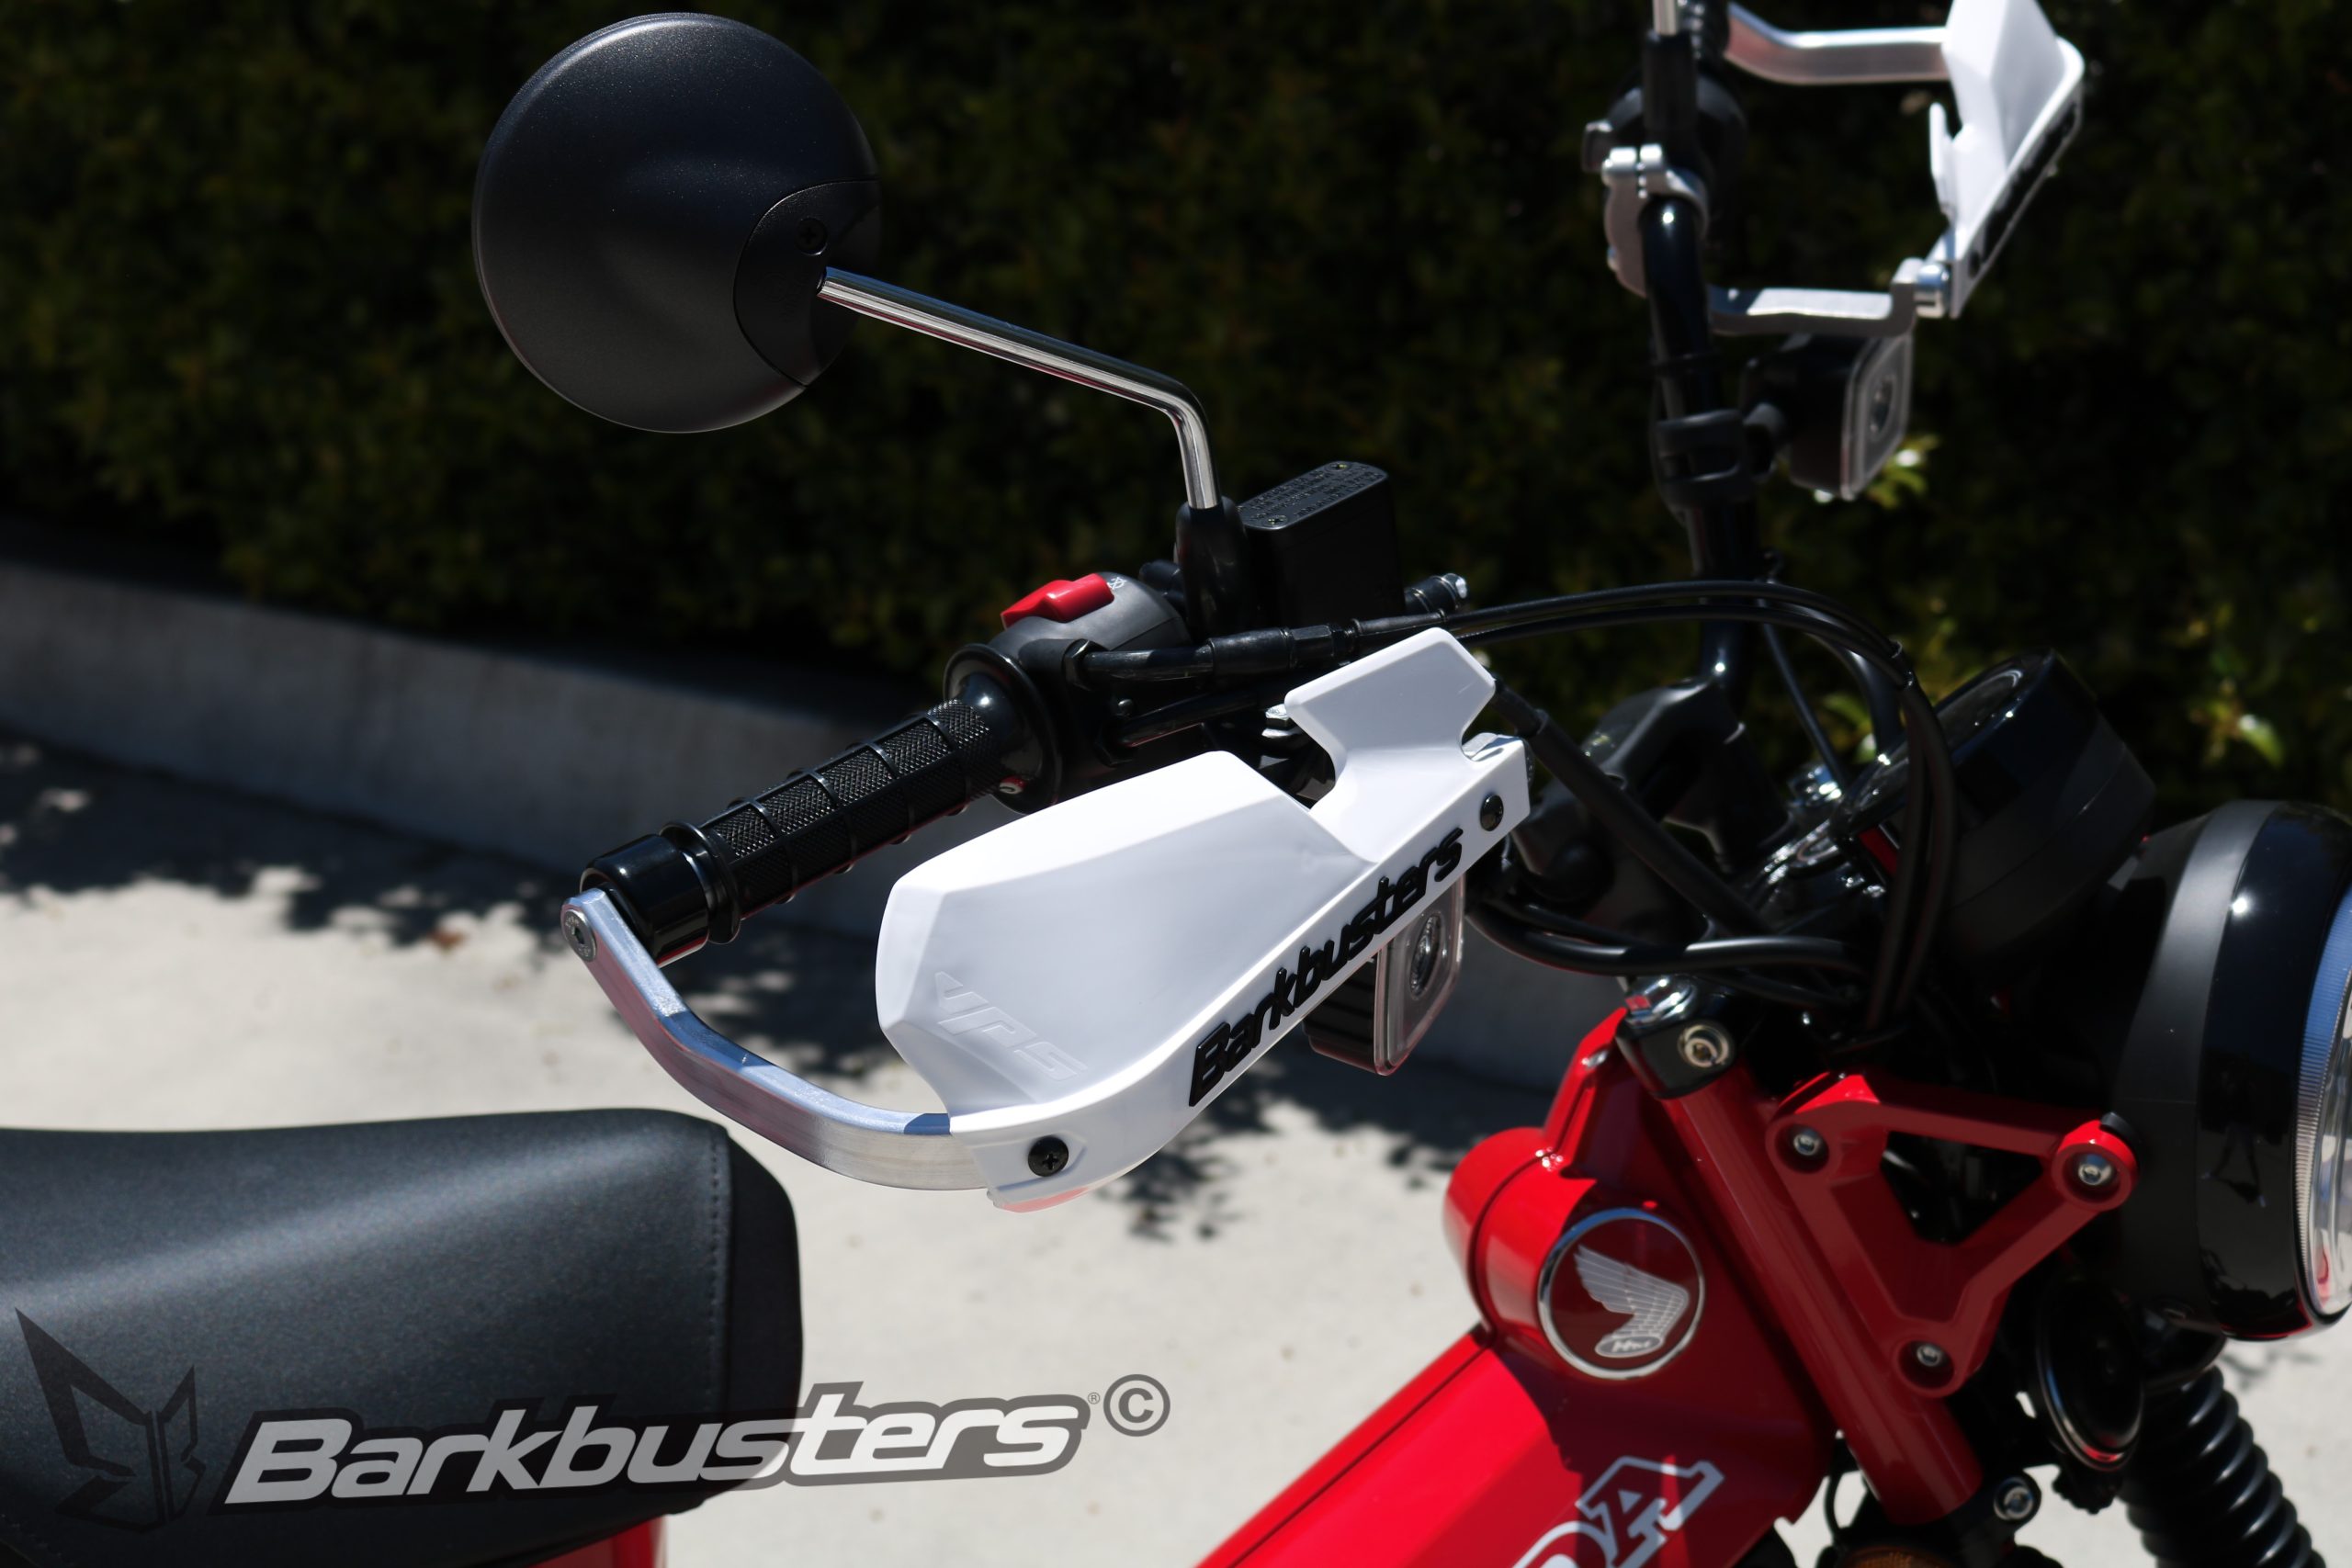 BARKBUSTERS Handguard Hardware Kit (Code: BHG-087) fitted to HONDA CT125 with VPS guards (Code: VPS-003) sold separately